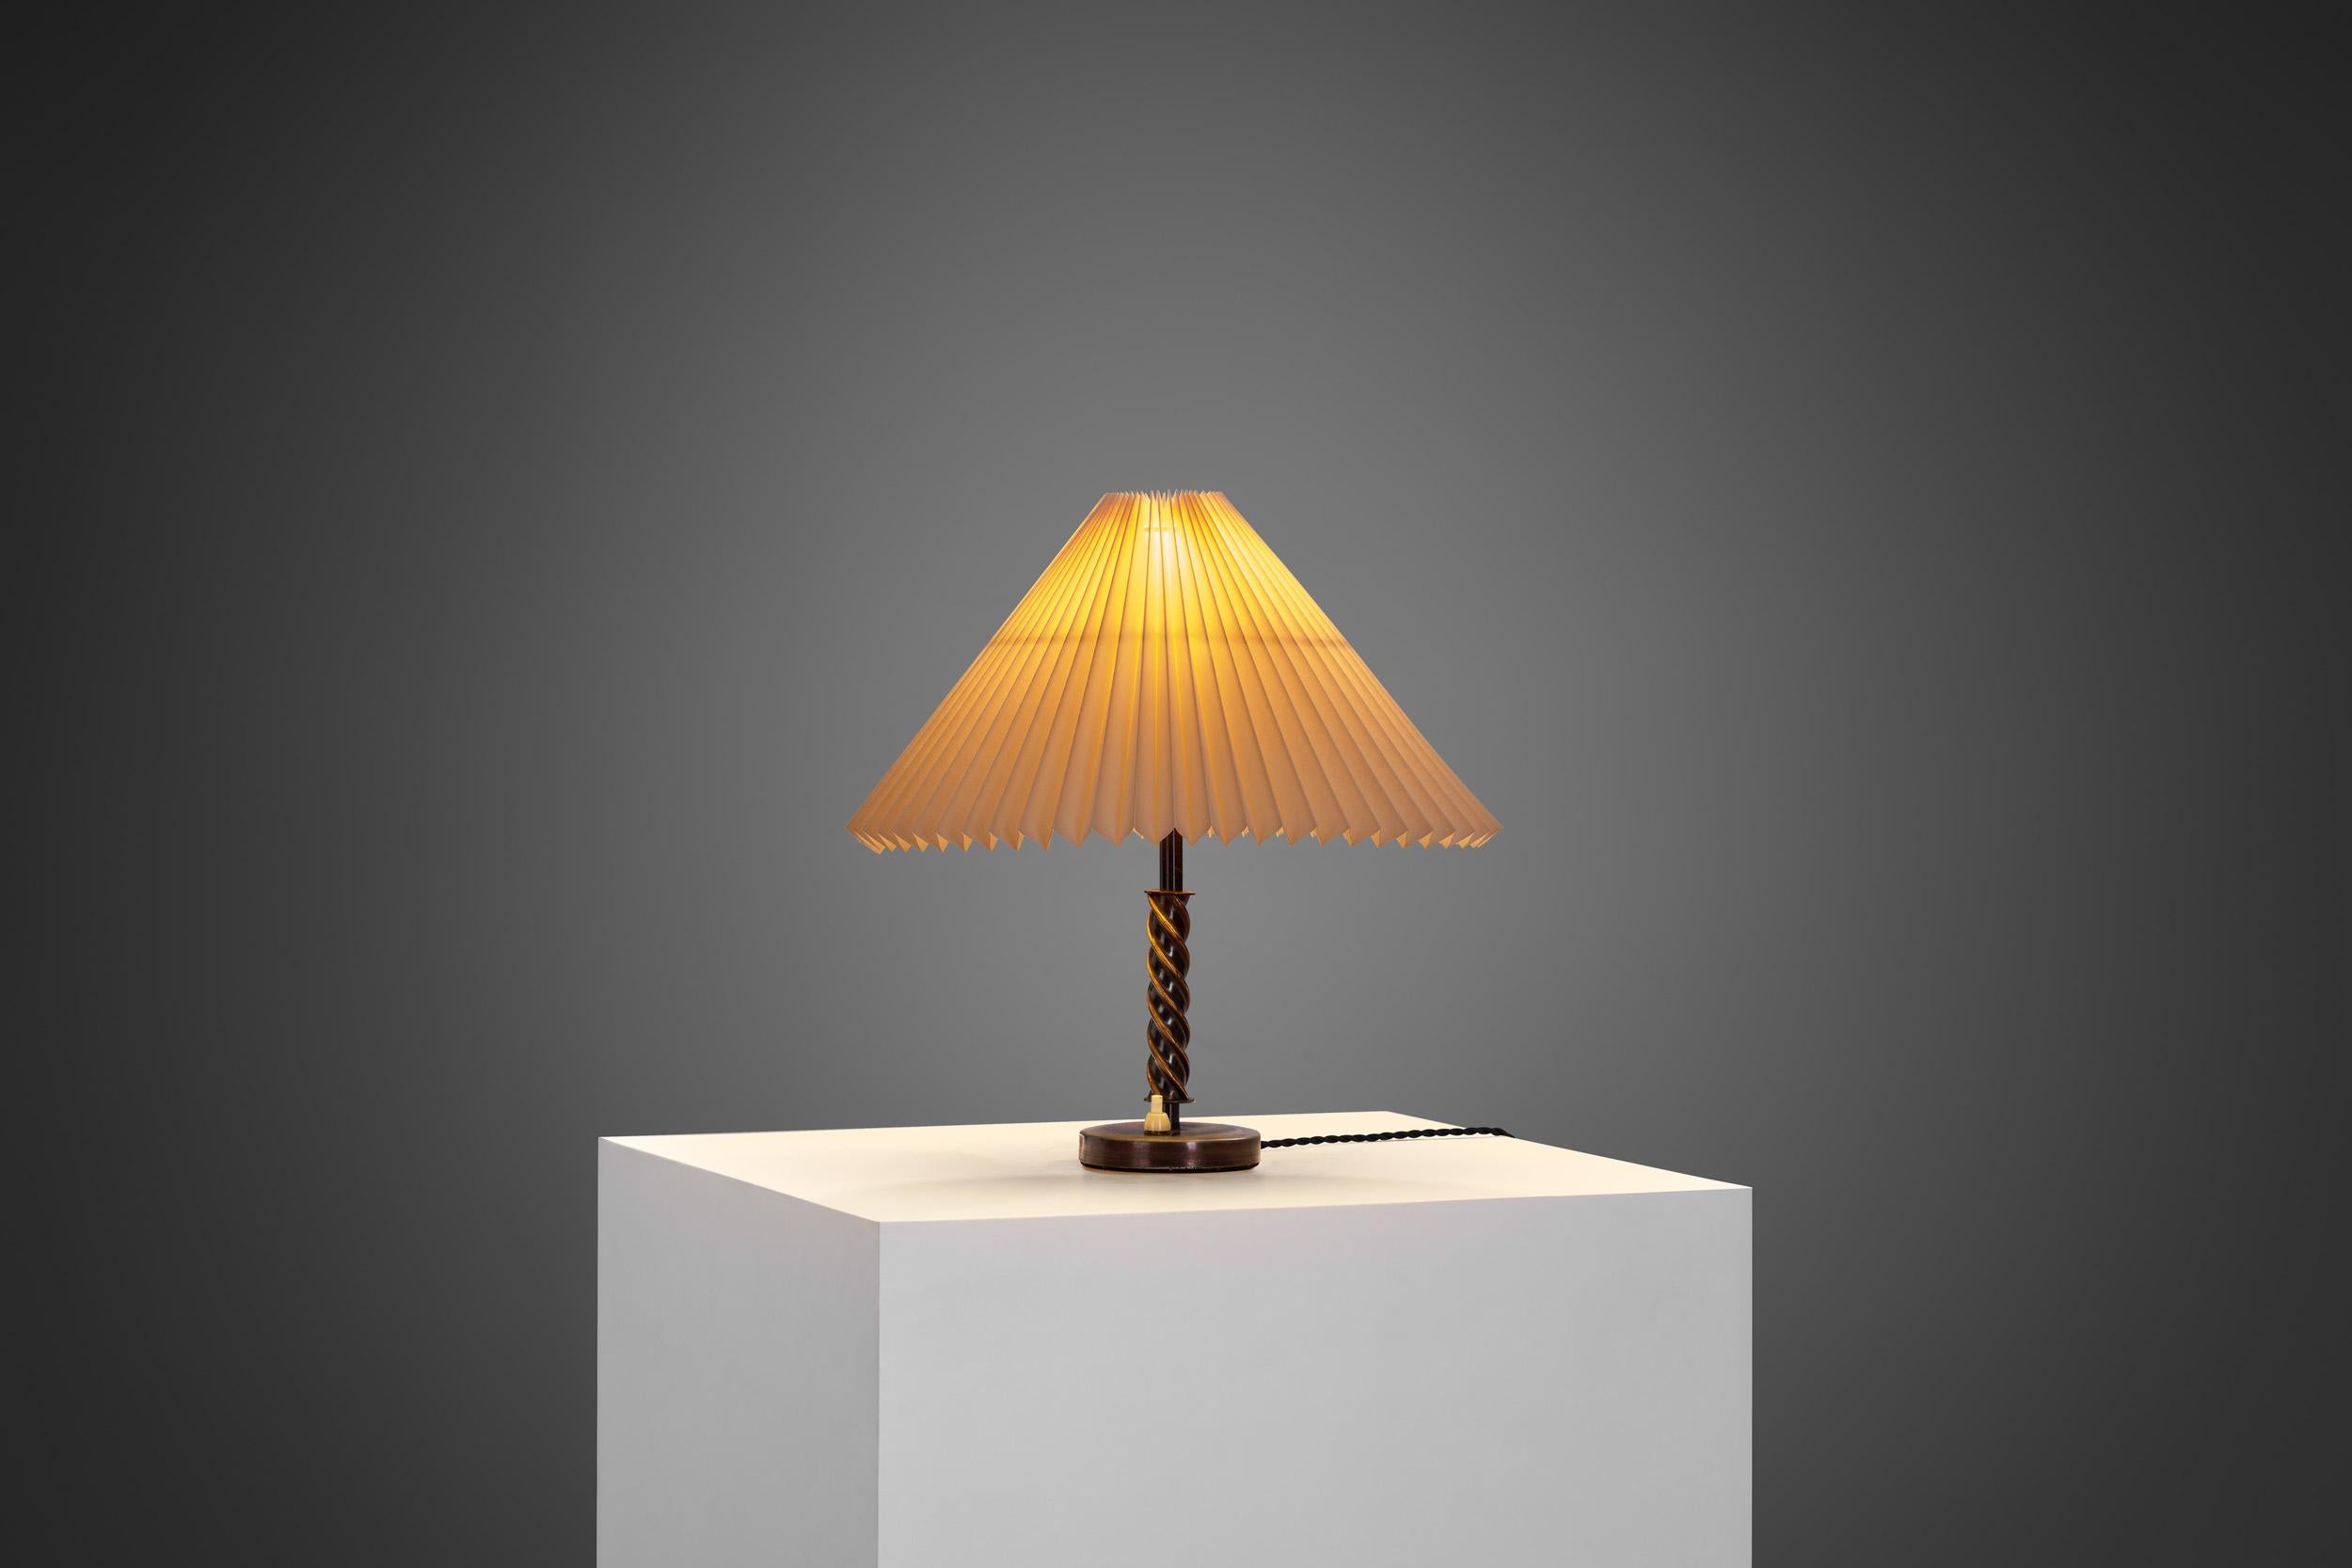 This table lamp has an essentially Scandinavian look, with a combination of interesting material choices and design. Scandinavian aesthetics left an indelible mark, exemplified by this table lamp from the first half of the 20th century, seamlessly